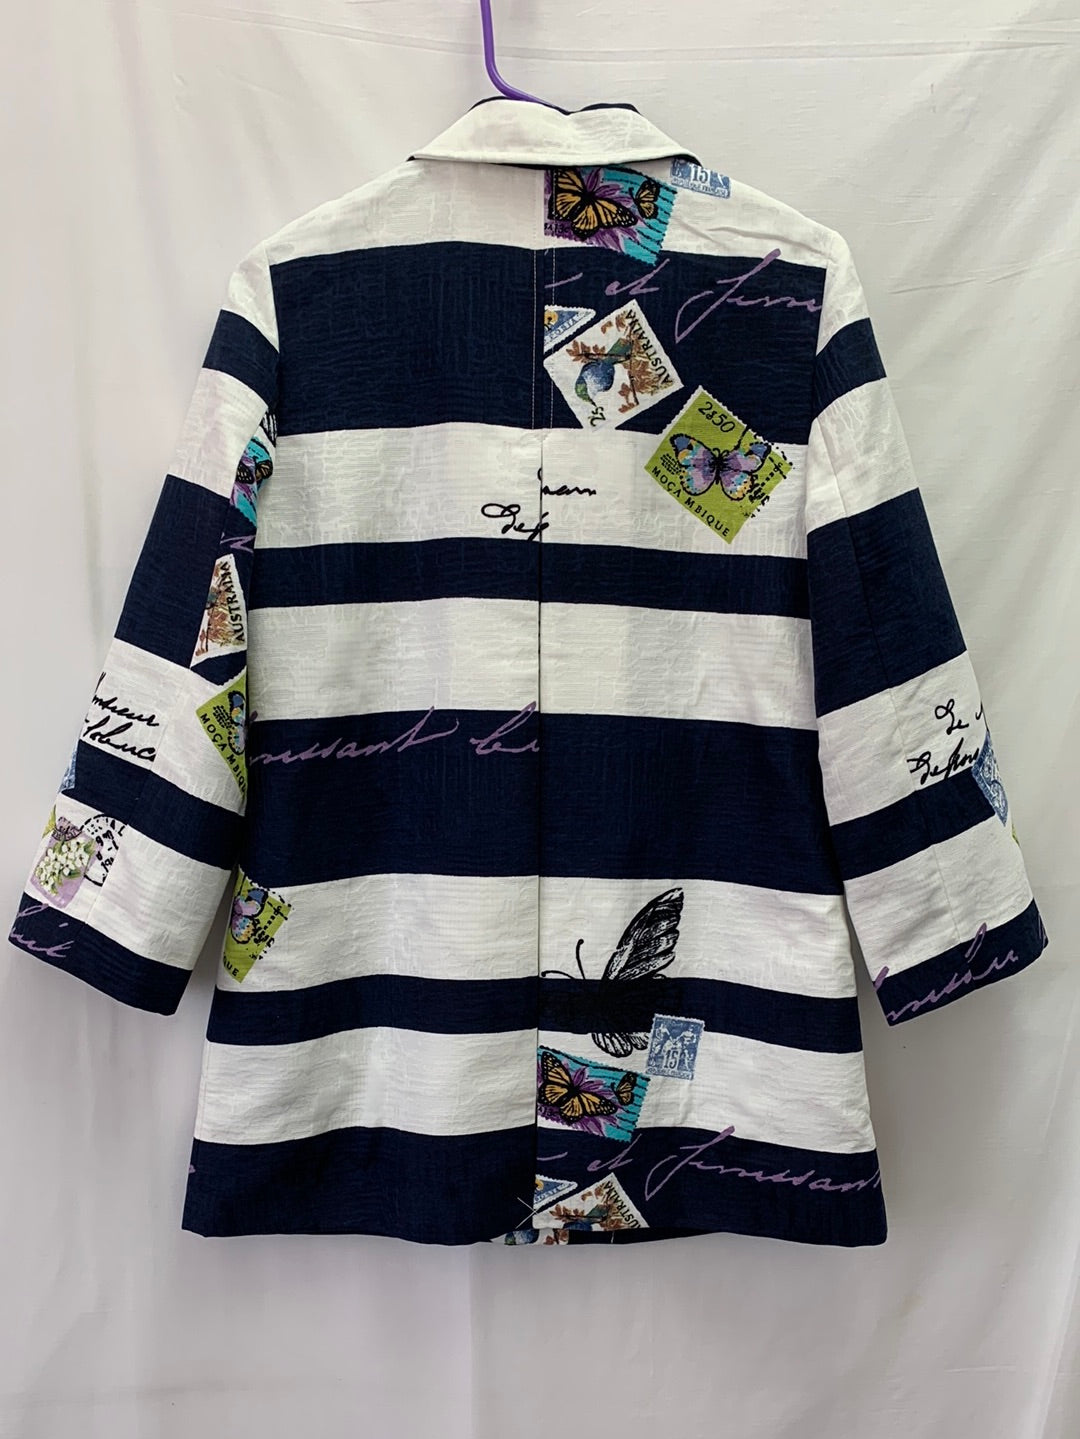 NWT - CHICO'S navy stripe Postcard Butterfly 3/4 Sleeve Jacket - 0 (S 4/6)